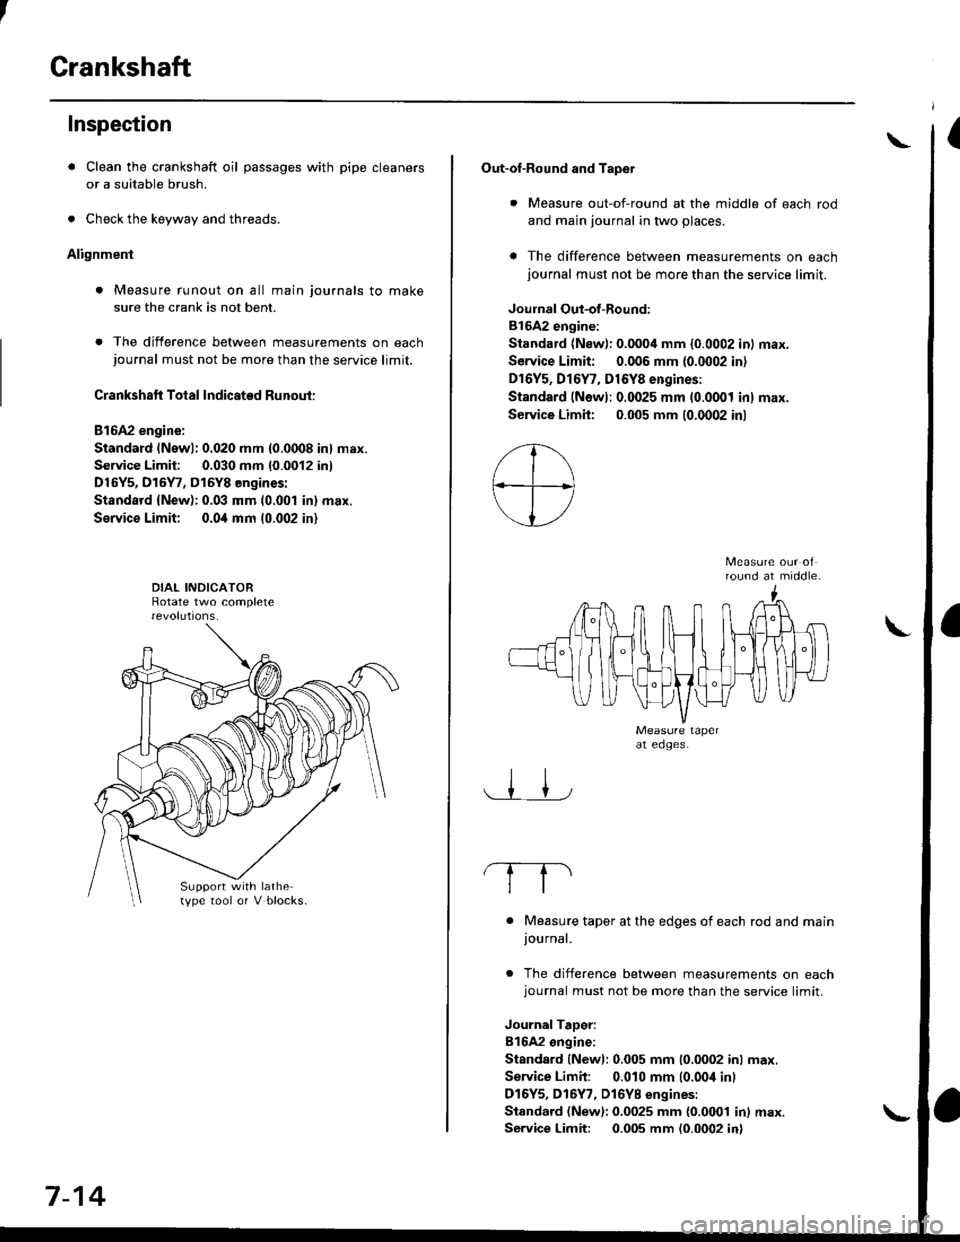 HONDA CIVIC 1999 6.G Workshop Manual Crankshaft
Inspection
. Clean the crankshaft oil passages with pipe cleaners
or a suitable brush.
. Check the keyway and threads.
Alignment
. Measure runout on all main journals to make
sure the crank